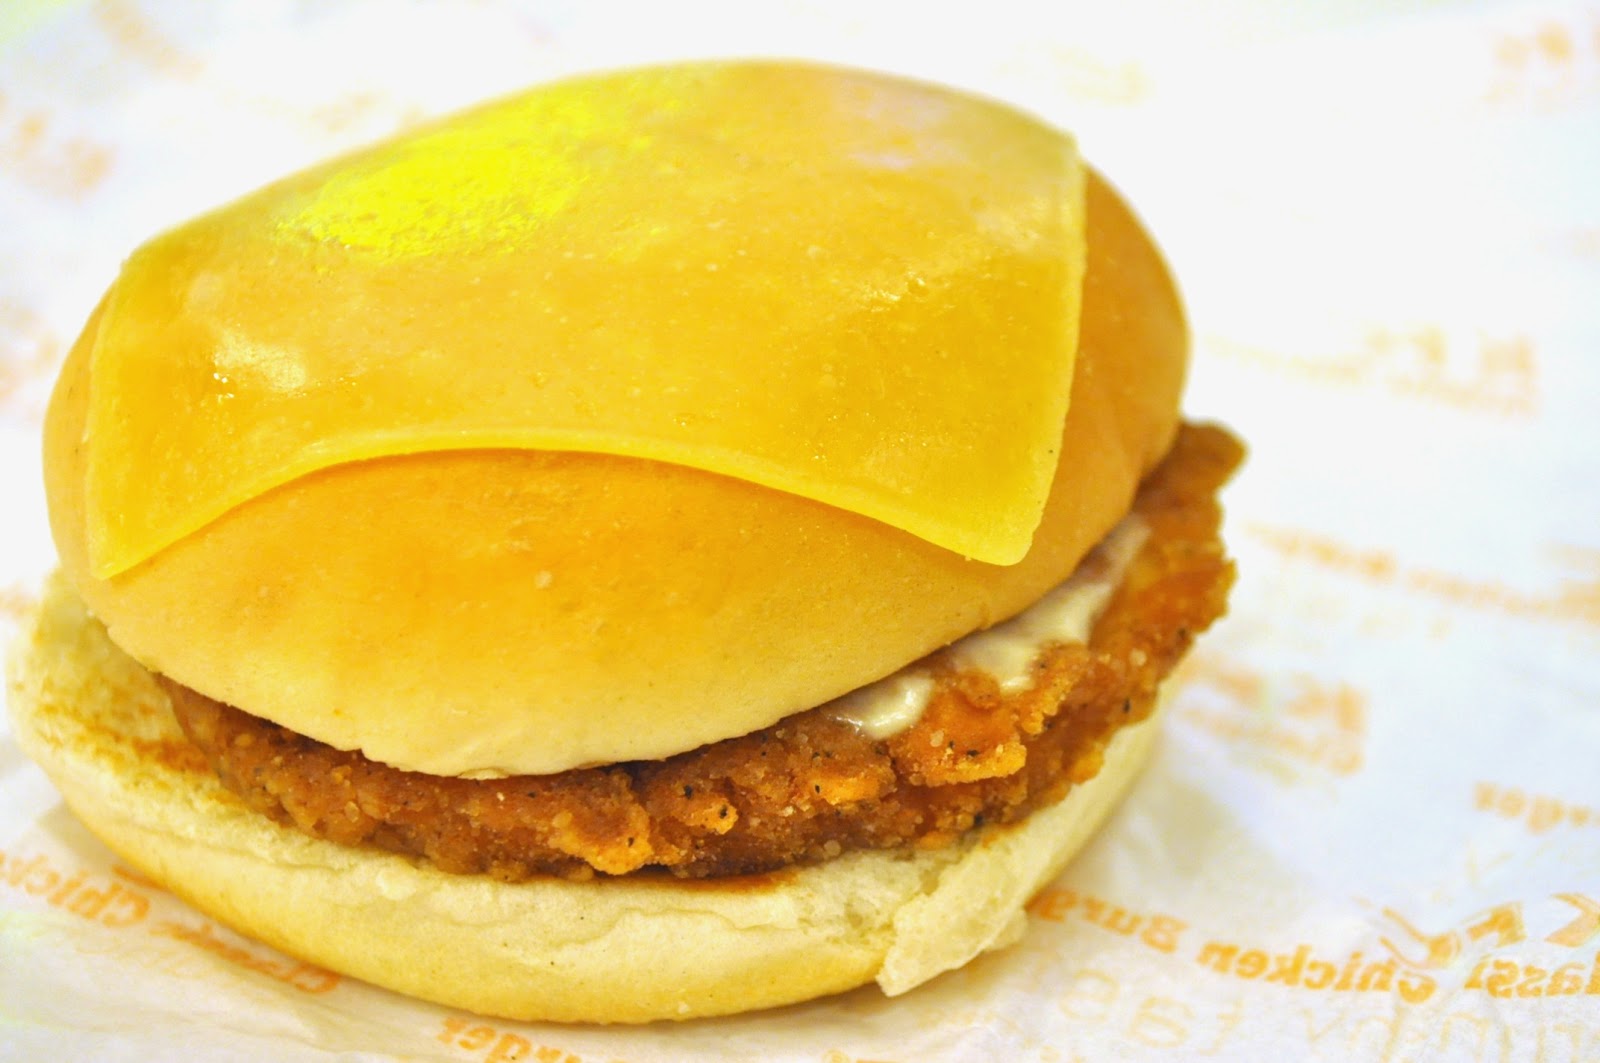 KFC Cheese Top Burger | BERYLLICIOUS- A Lifestyle and Blog in the Philippines